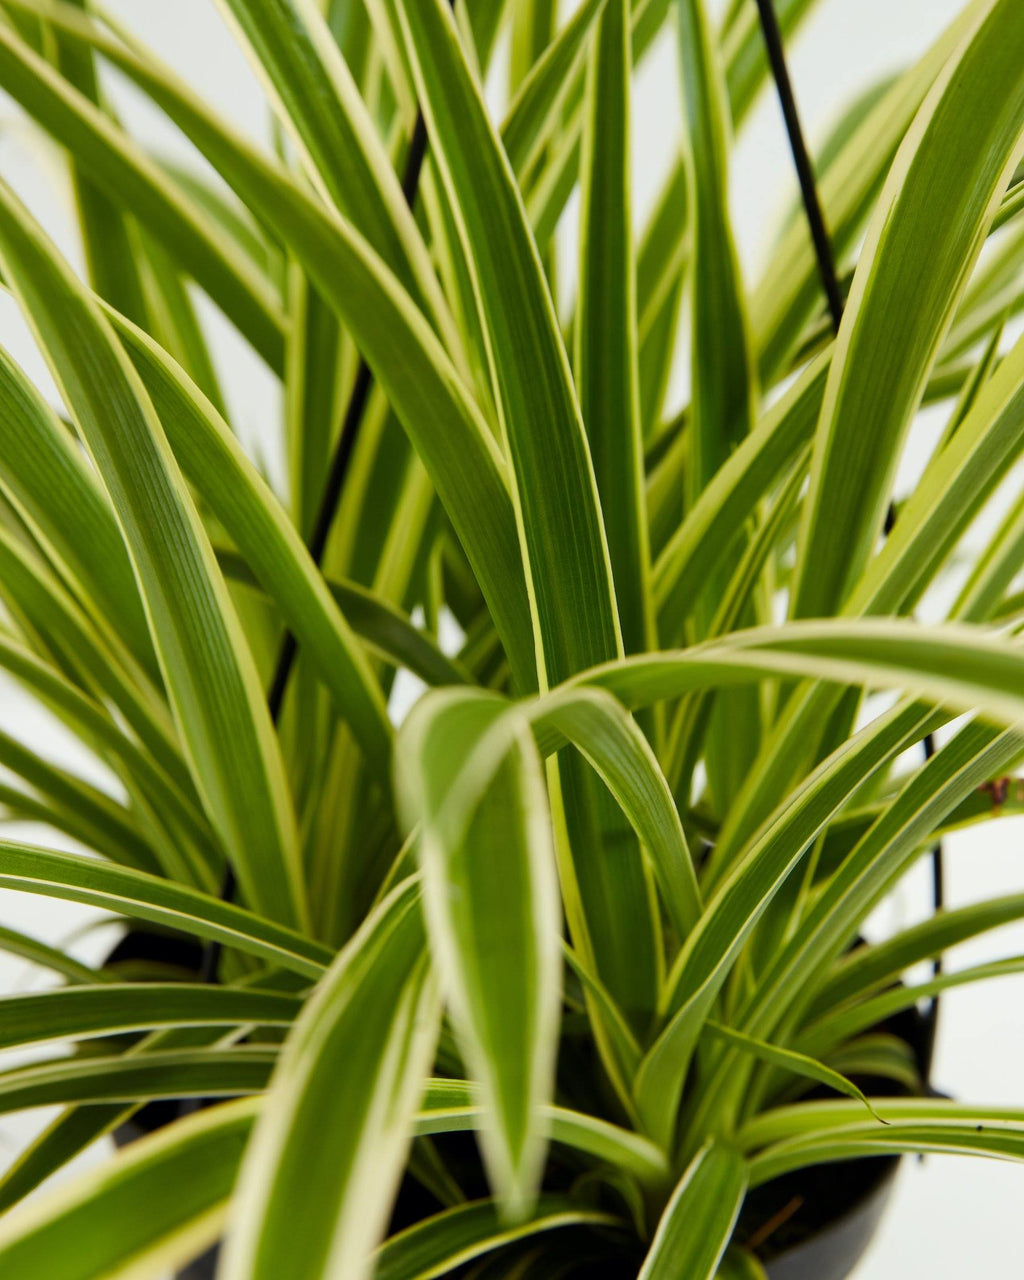 Spider Plants for Sale - Buying & Growing Guide 